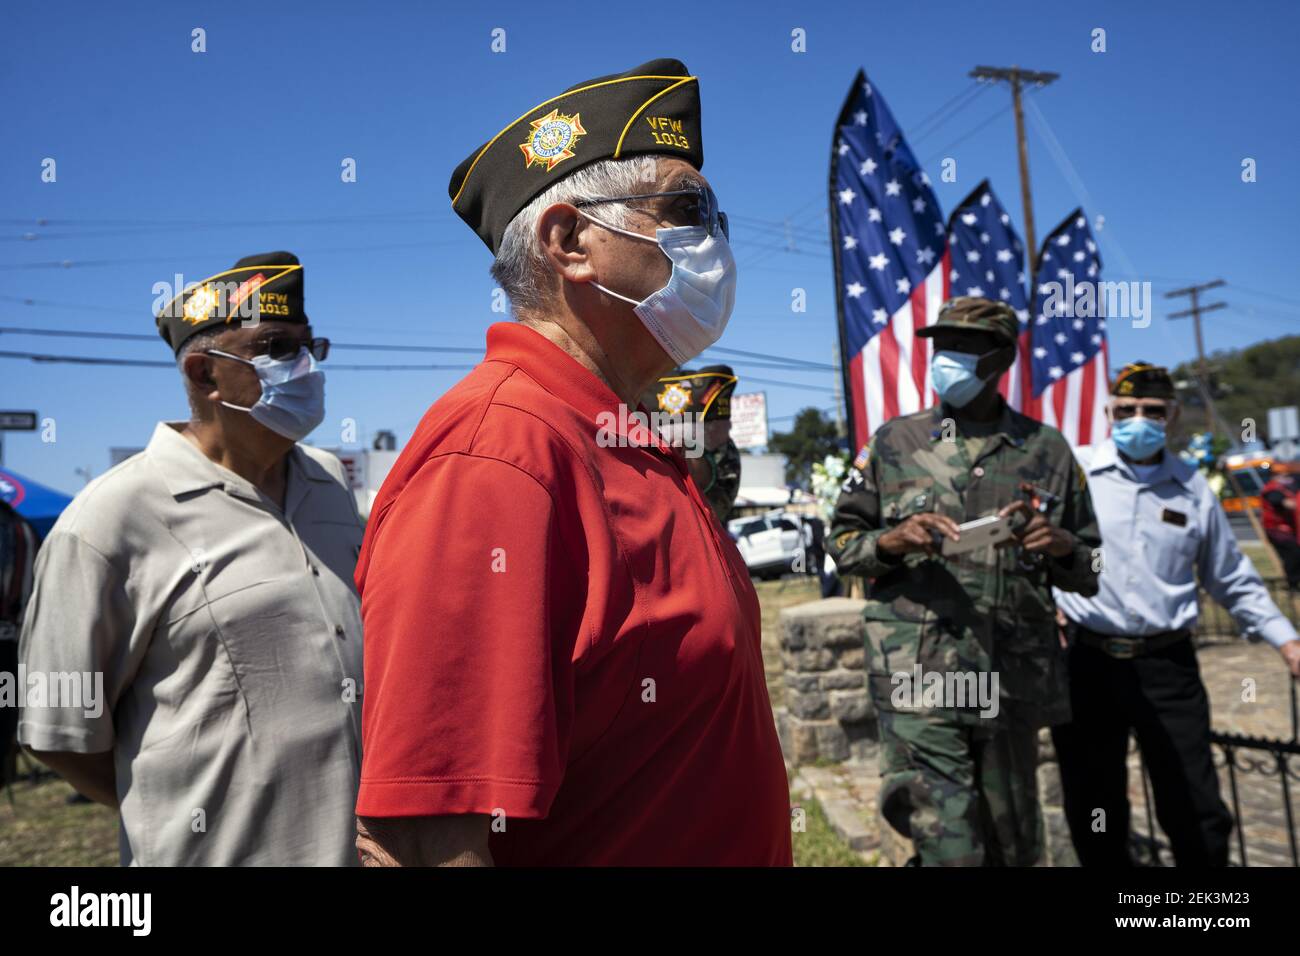 Veterans wearing face masks due to the COVID 19 pandemic participate in a Memorial Day ceremony in Los Angeles, California on May 25, 2020. The event took place at the Los Cinco Puntos/Five Points Memorial that honors Mexican American soldiers who died in World War II, the Korean War, and the Vietnam War. (Photo by Ronen Tivony/Sipa USA) *** Please Use Credit from Credit Field *** Stock Photo